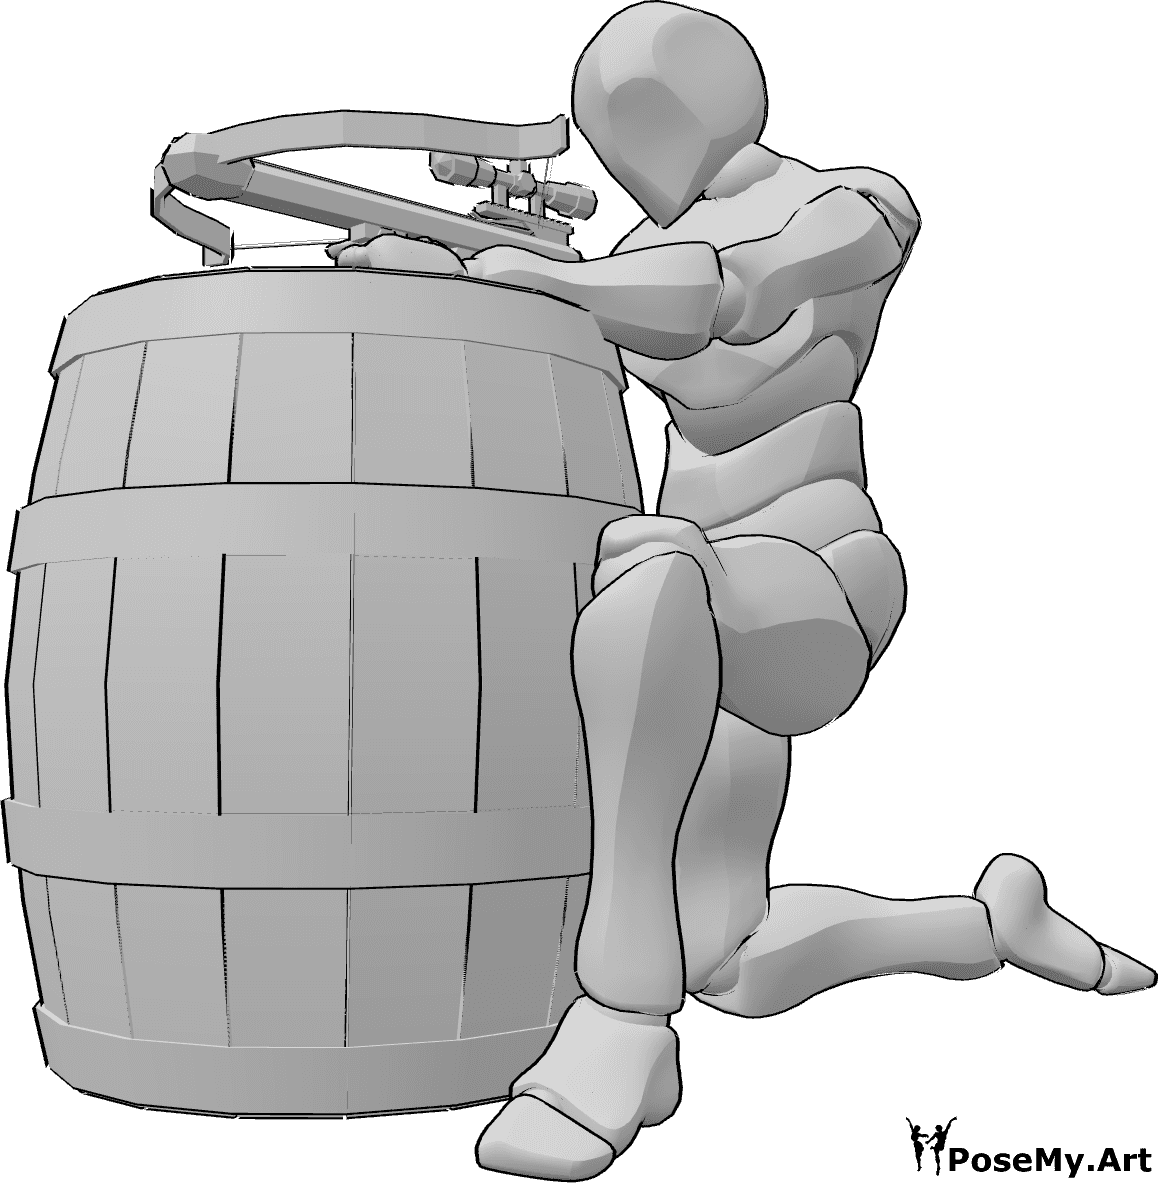 Pose Reference- Crossbow barrel aiming pose - Male is kneeling and aiming his crossbow while leaning on a barrel